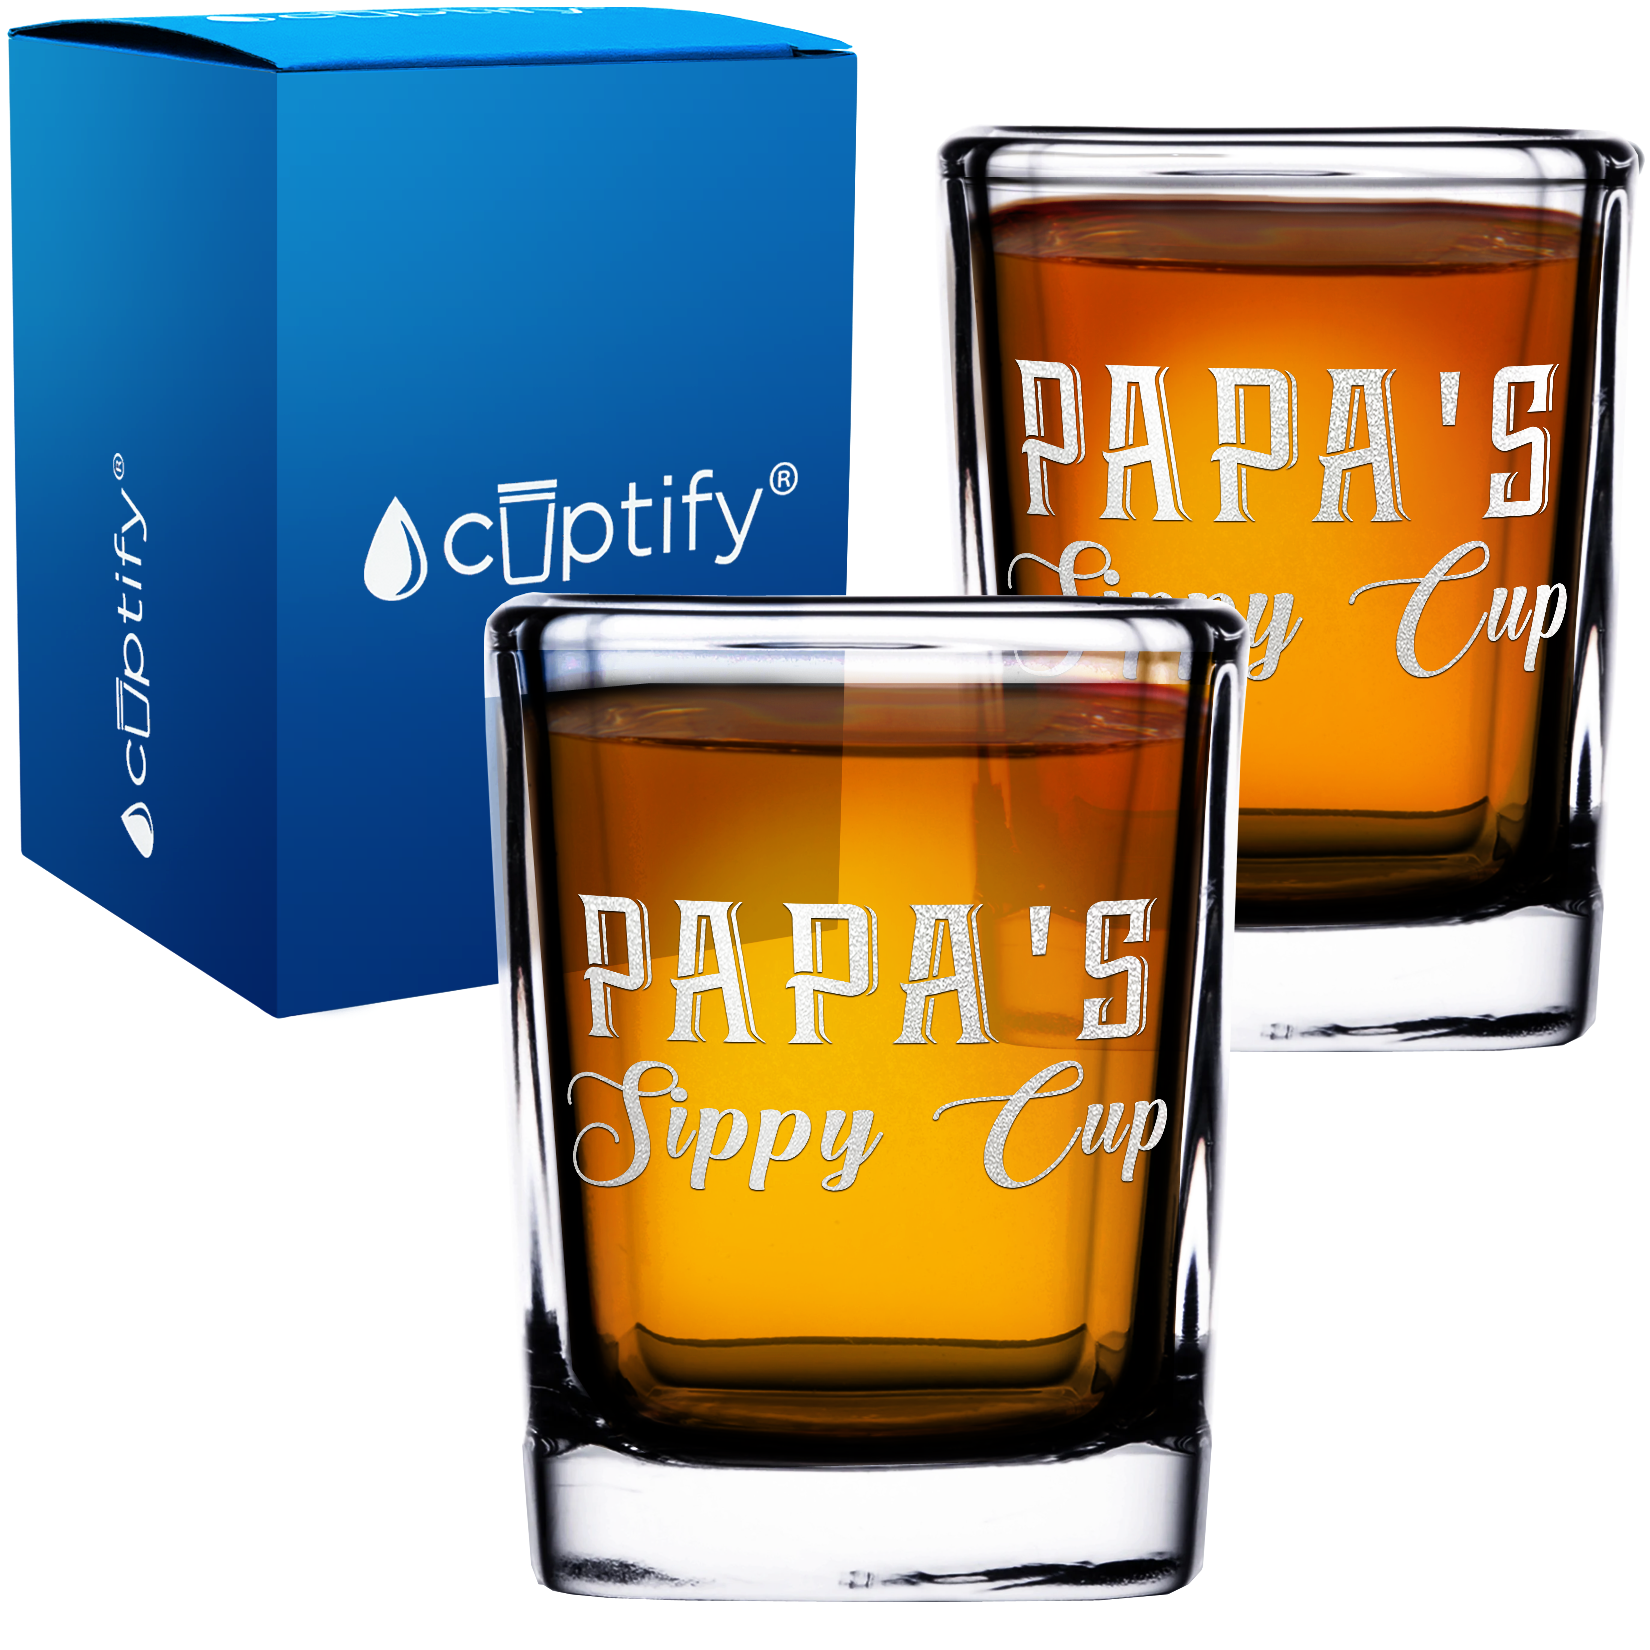 Papa's Sippy Cup 2oz Square Shot Glasses - Set of 2